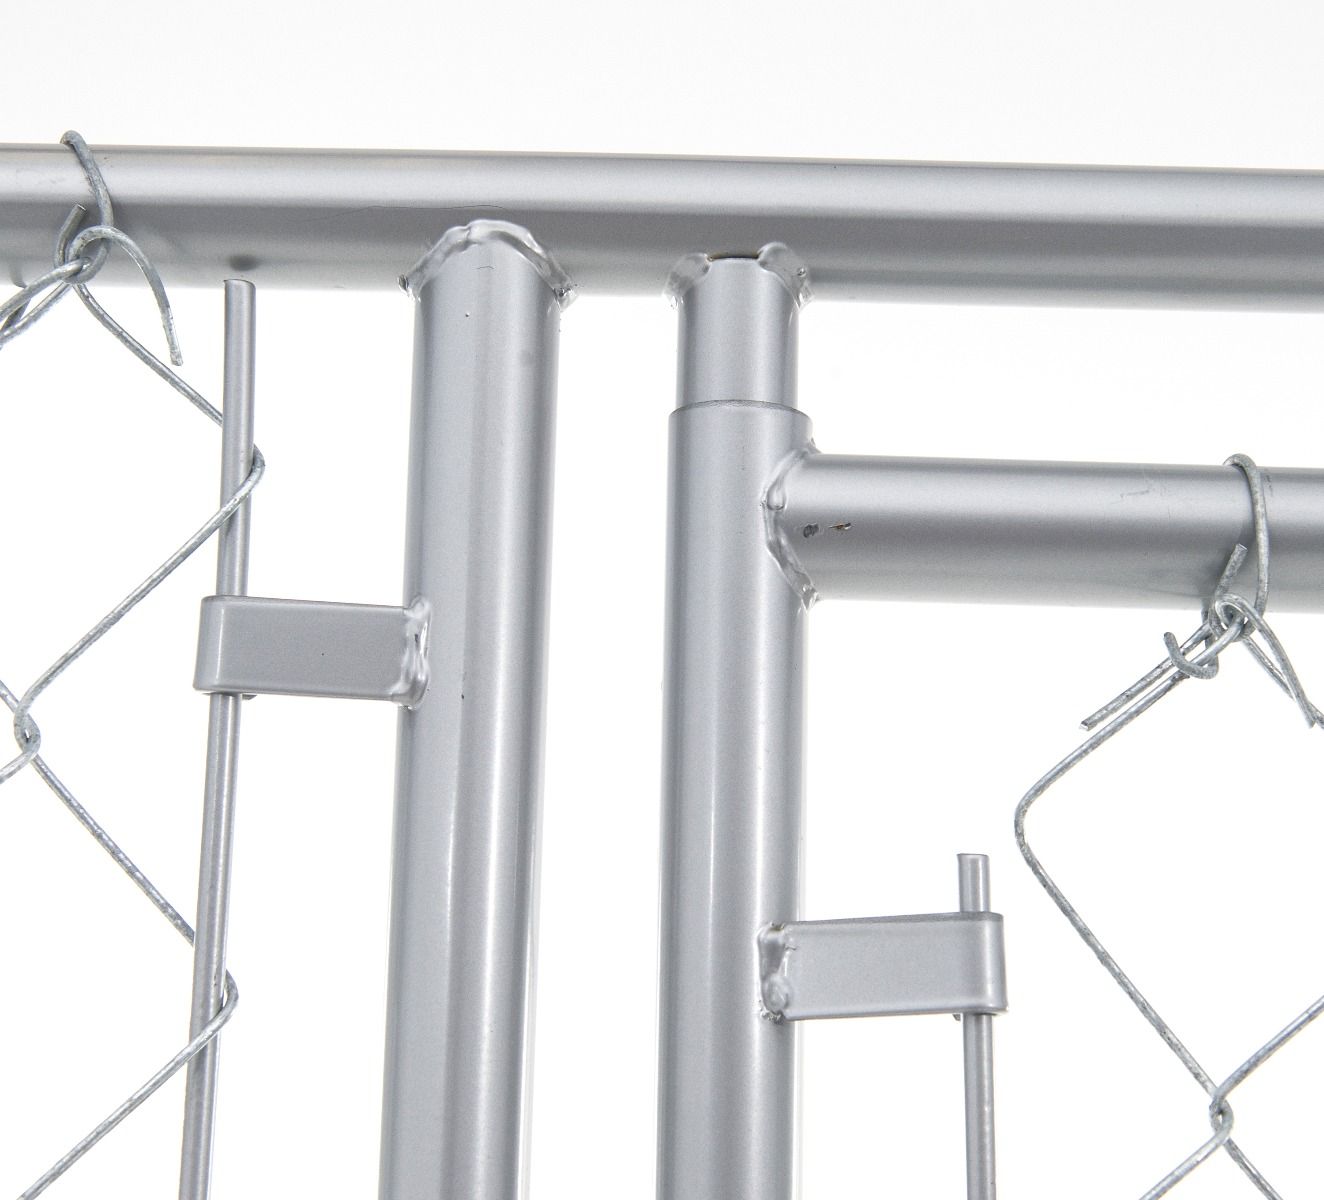 Lucky Dog Galvanized Chain Link Kennel